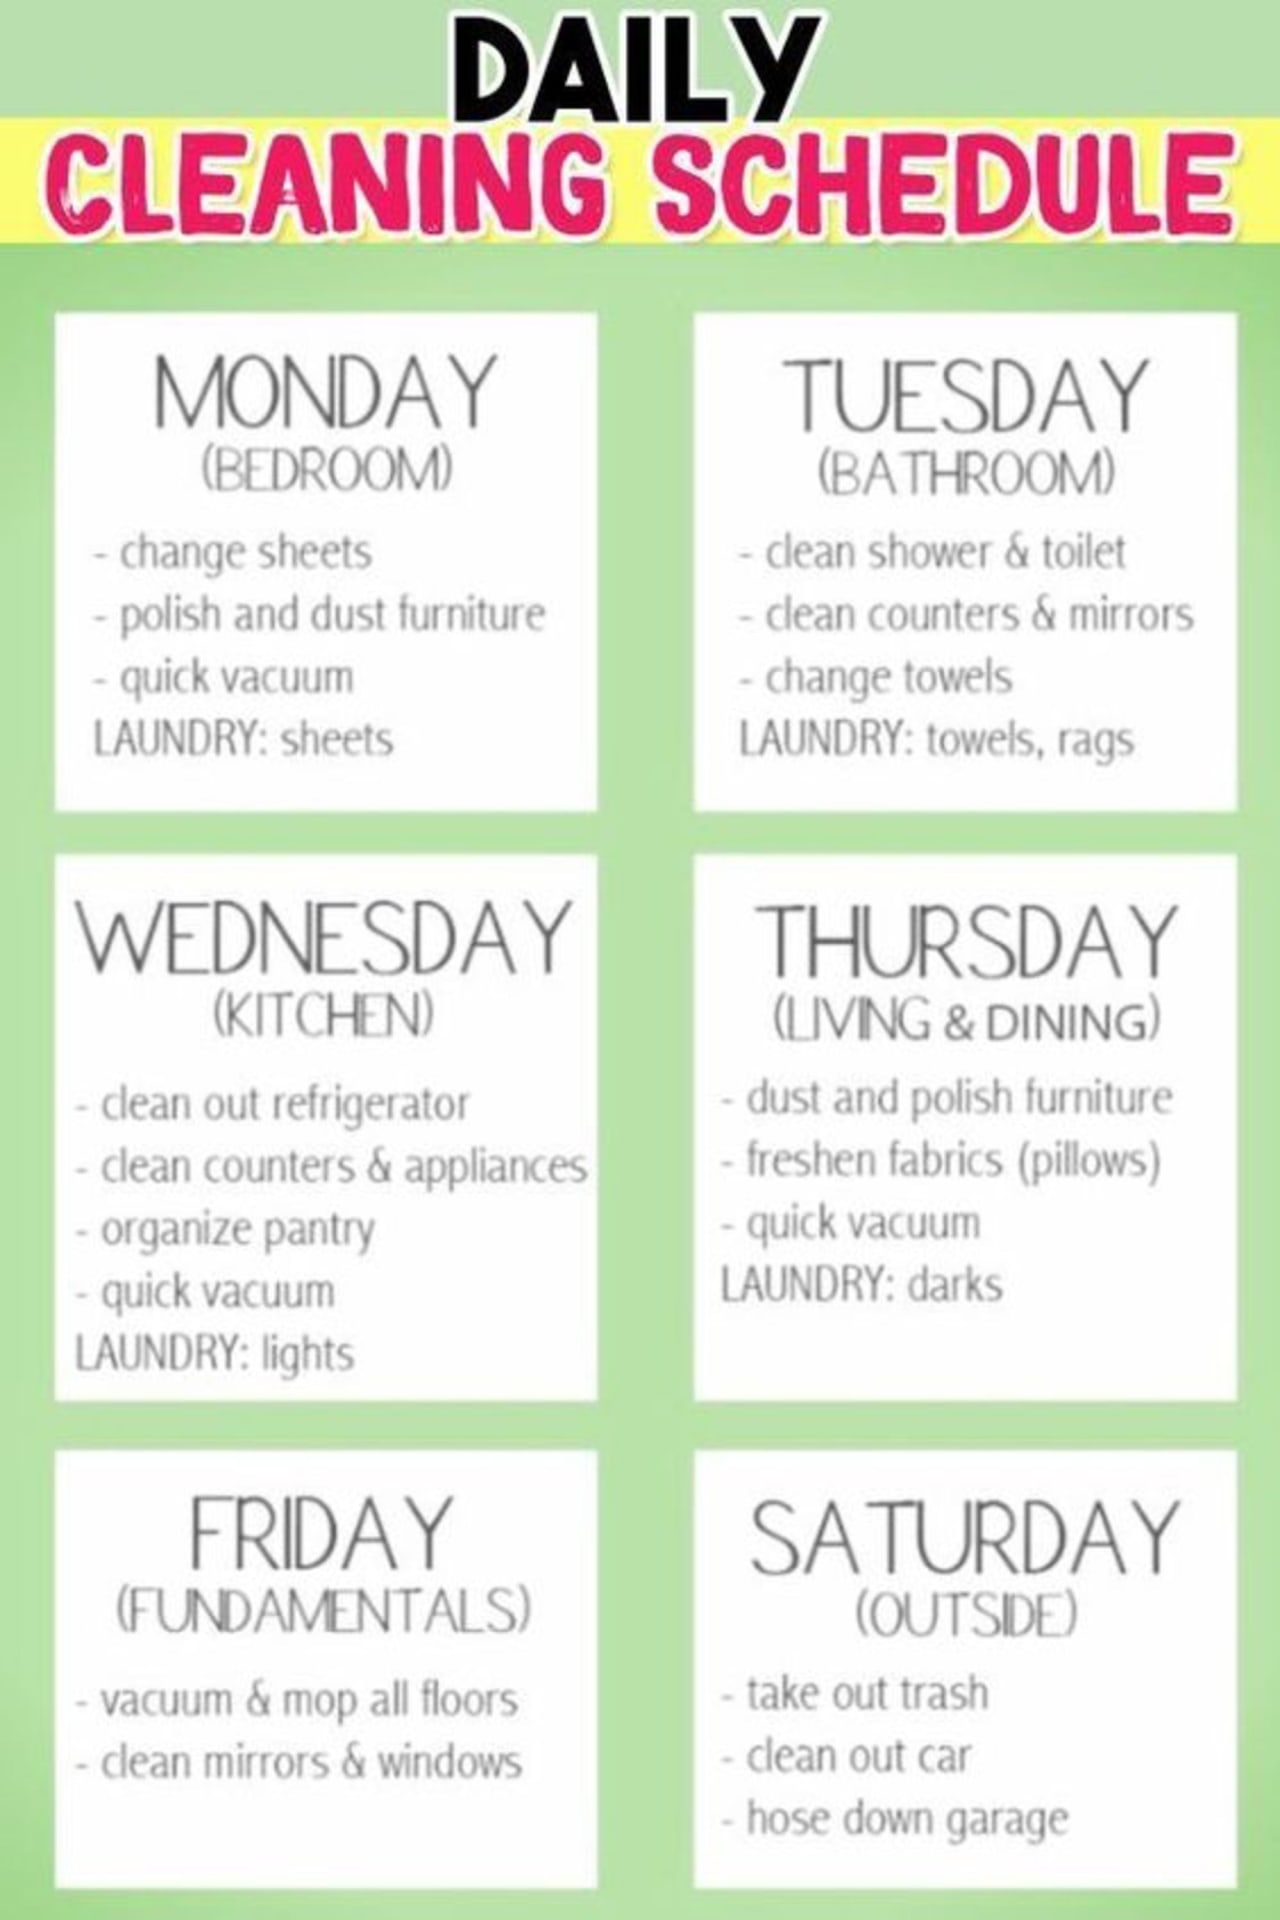 cleaning schedule - daily cleaning schedule